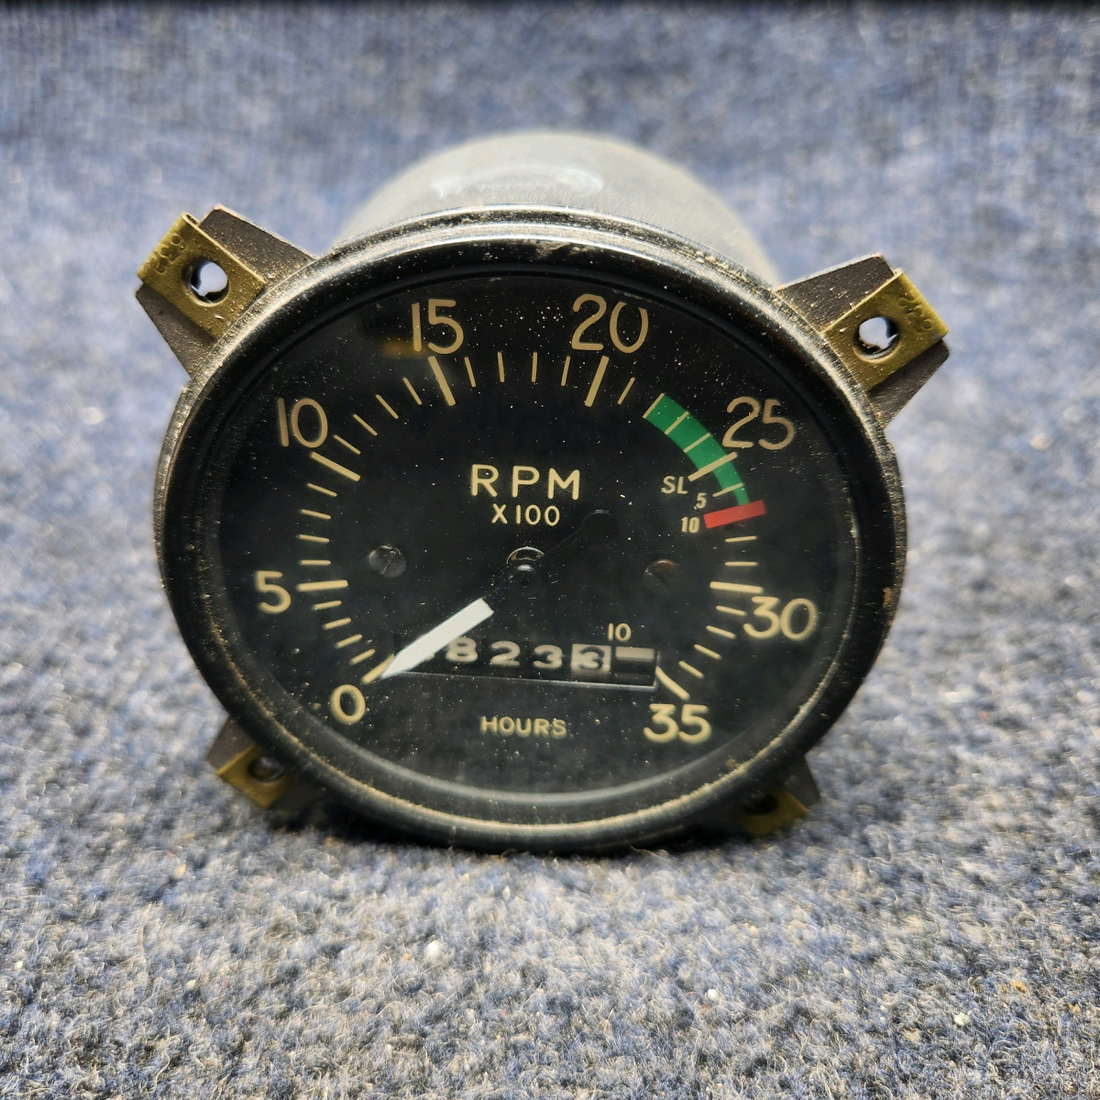 Used aircraft parts for sale, 550614 PIPIR PA32RT-300 550614 TACHOMETER  RPM